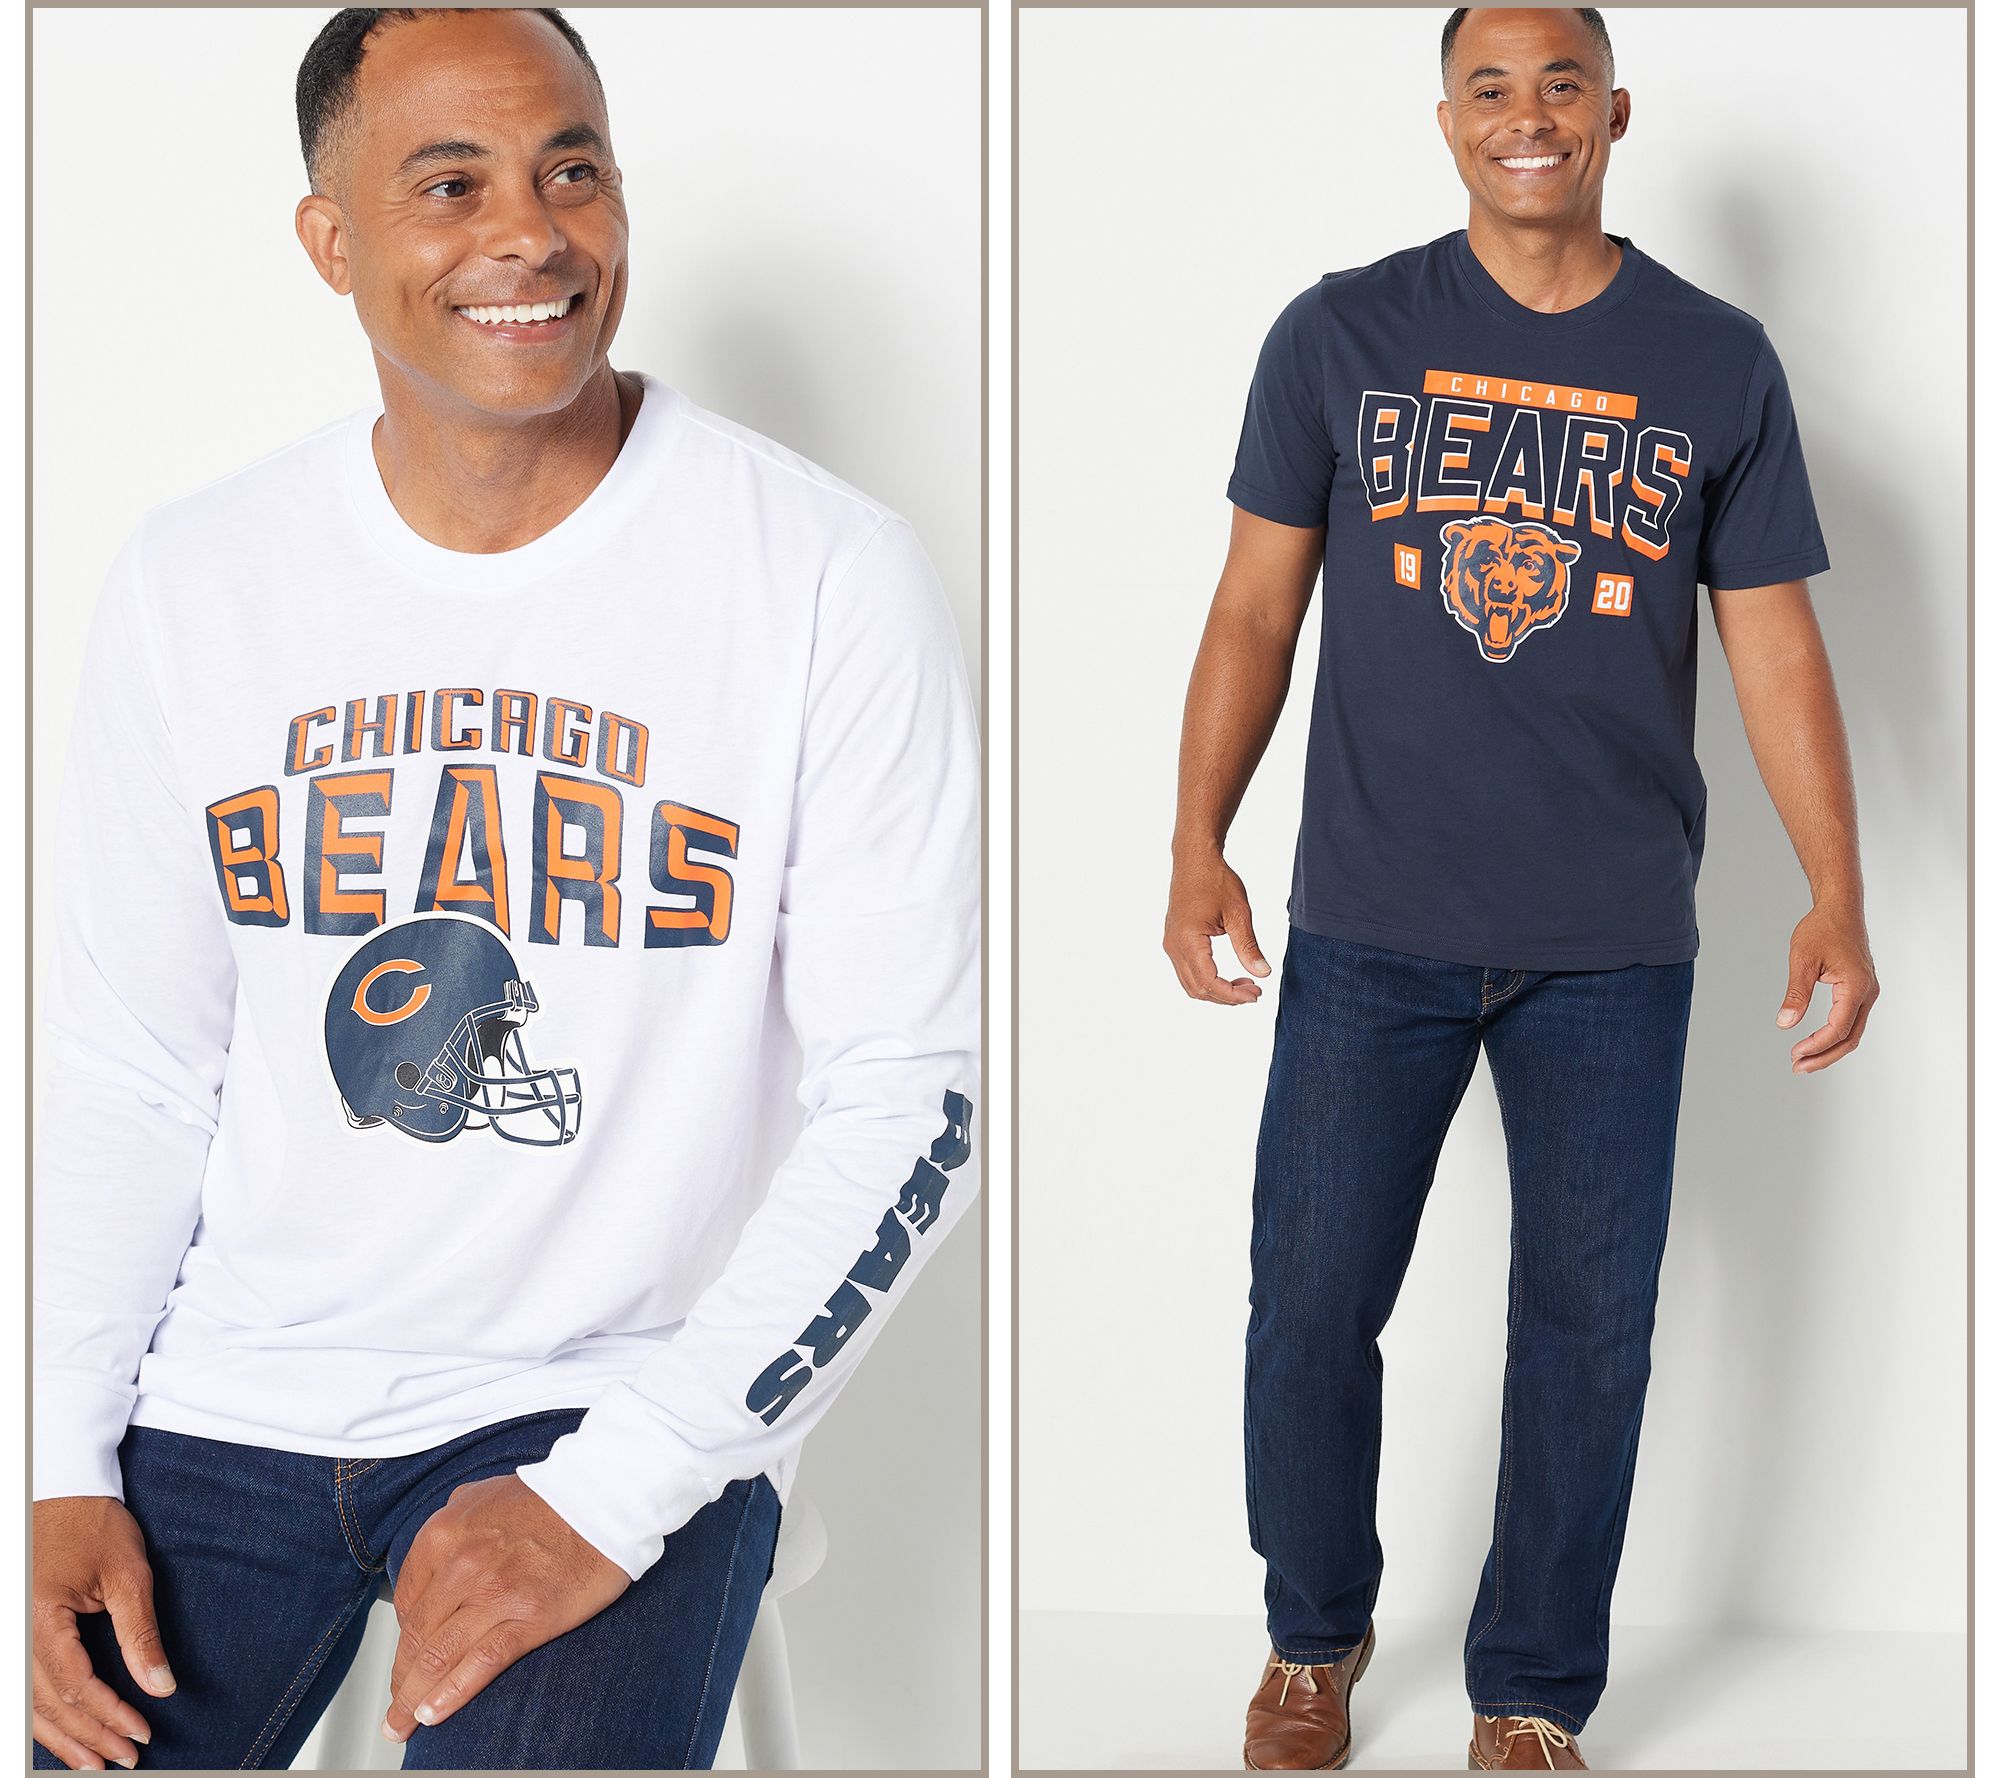  Fanatics Men's NFL Long and Short Sleeve Two-Pack T-Shirt :  Sports & Outdoors